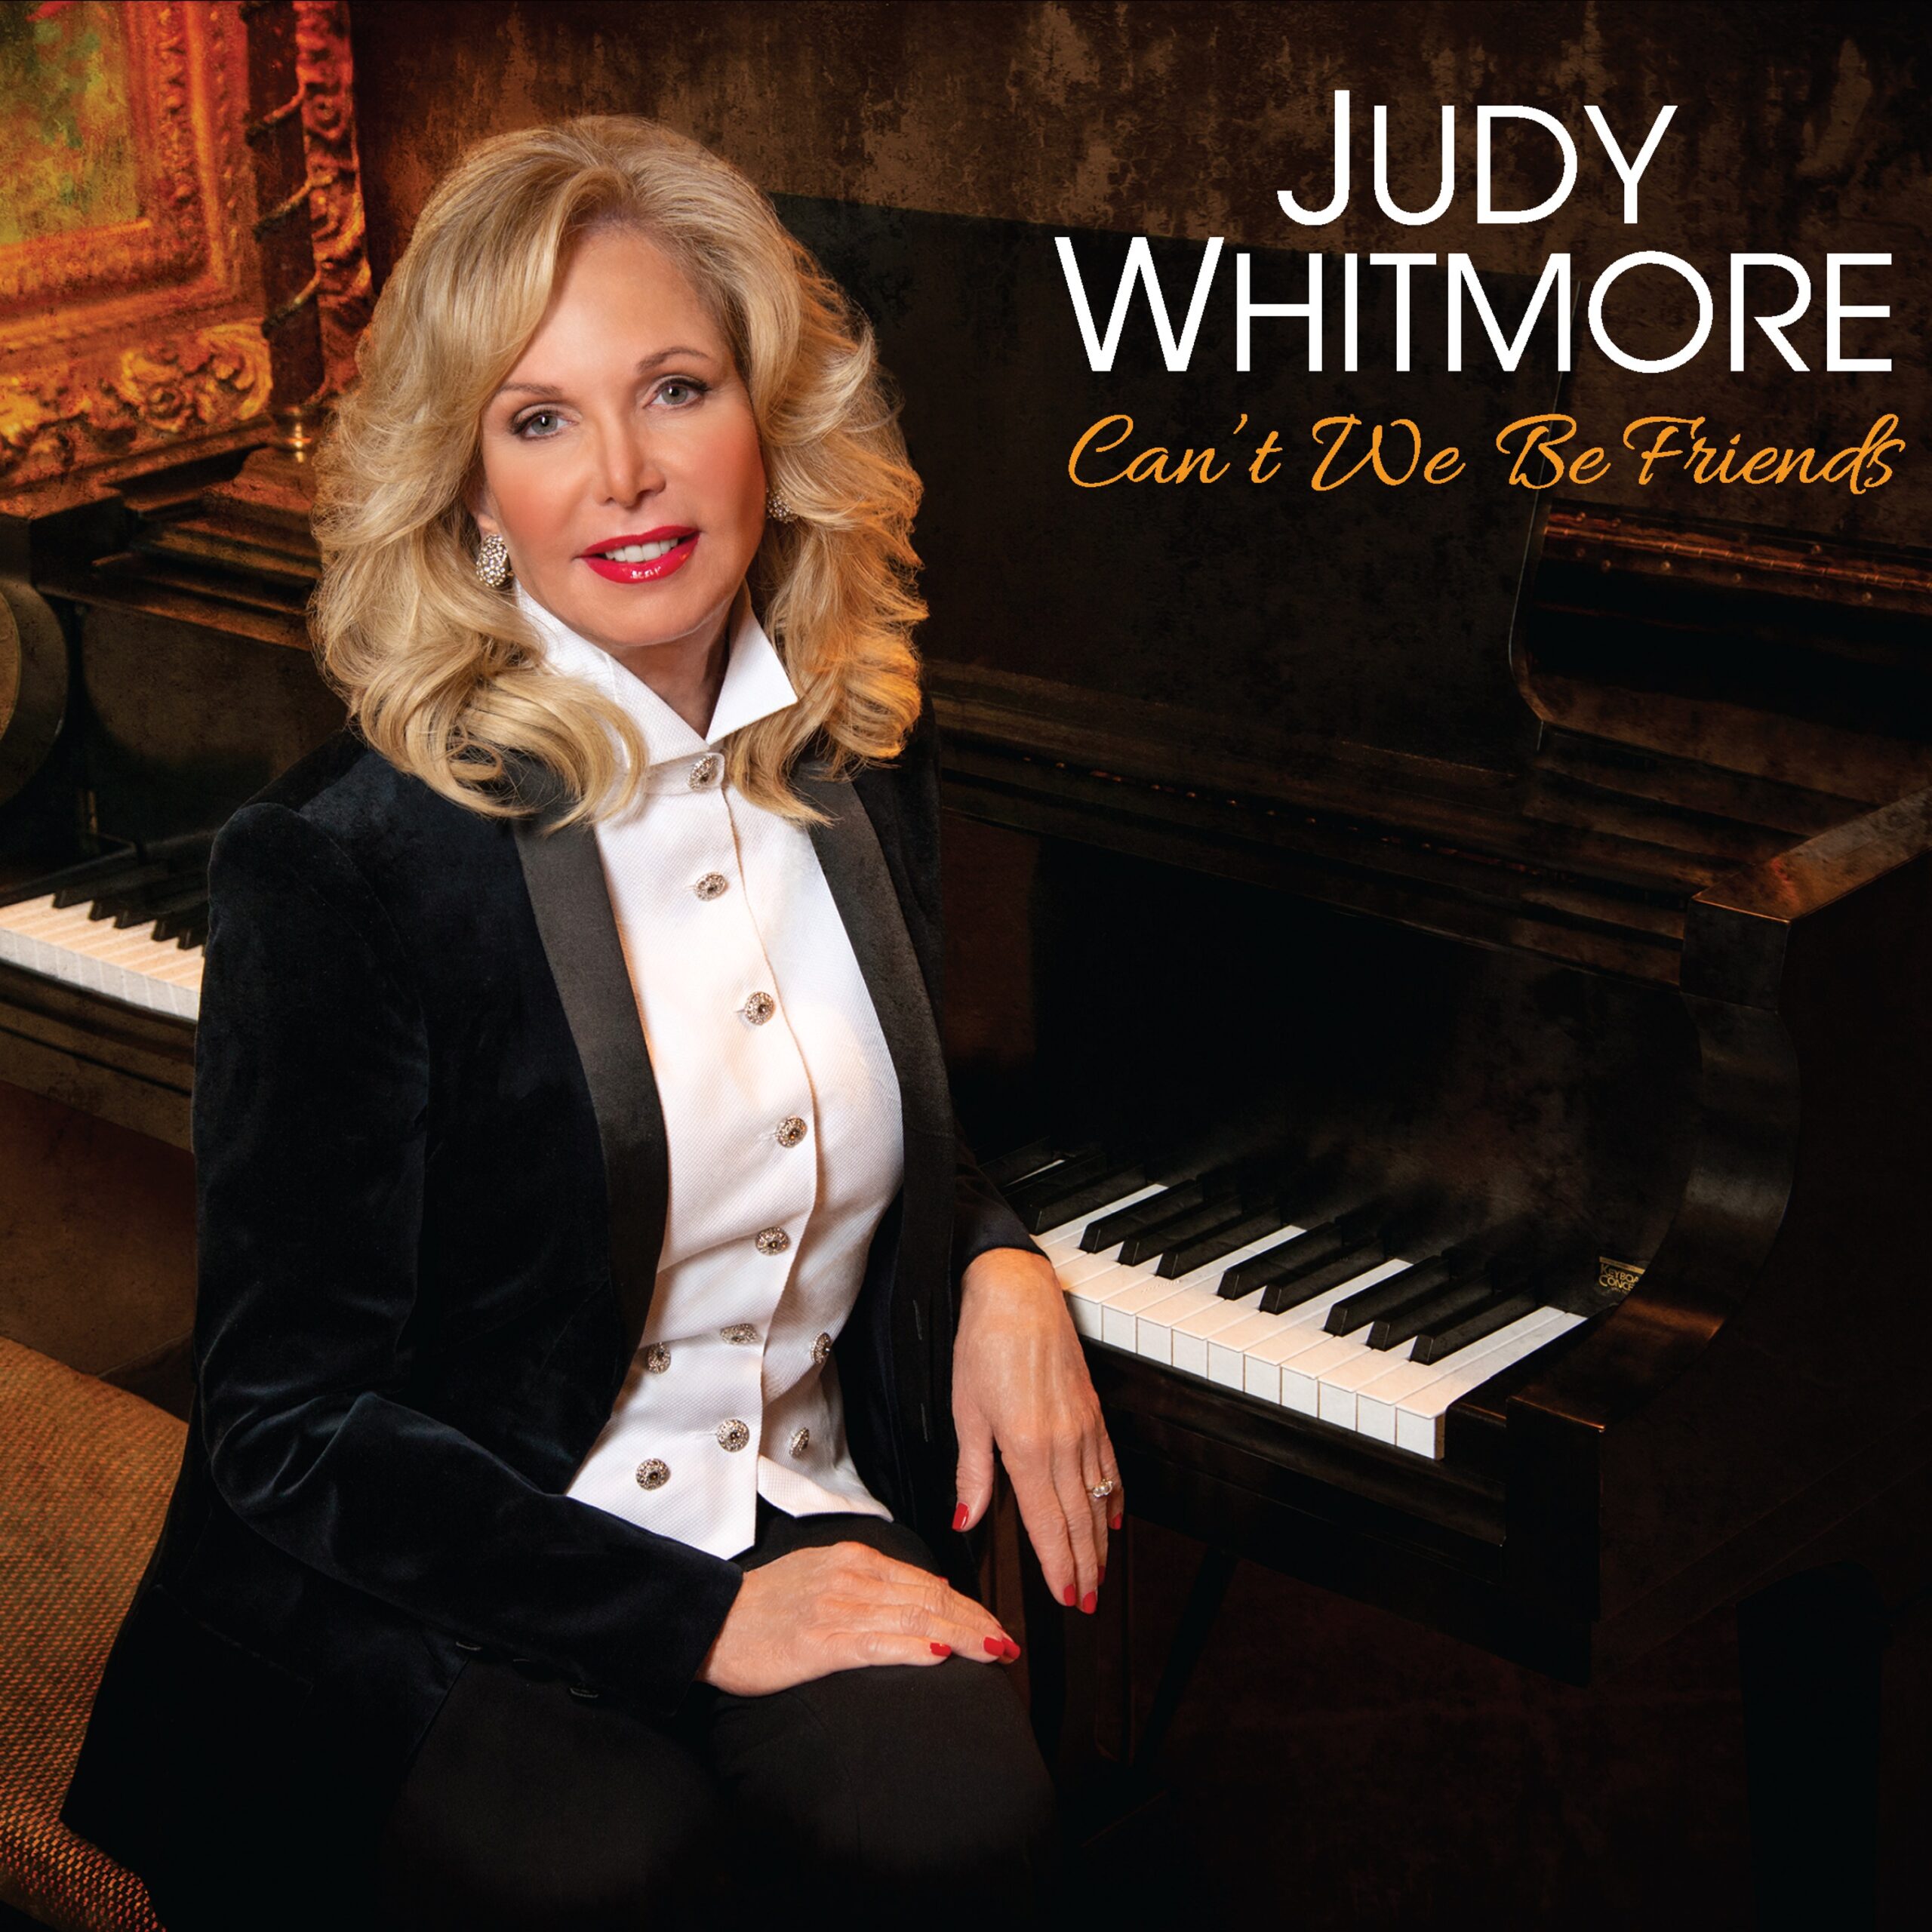 Judy Whitmore’s “Can’t We Be Friends” released